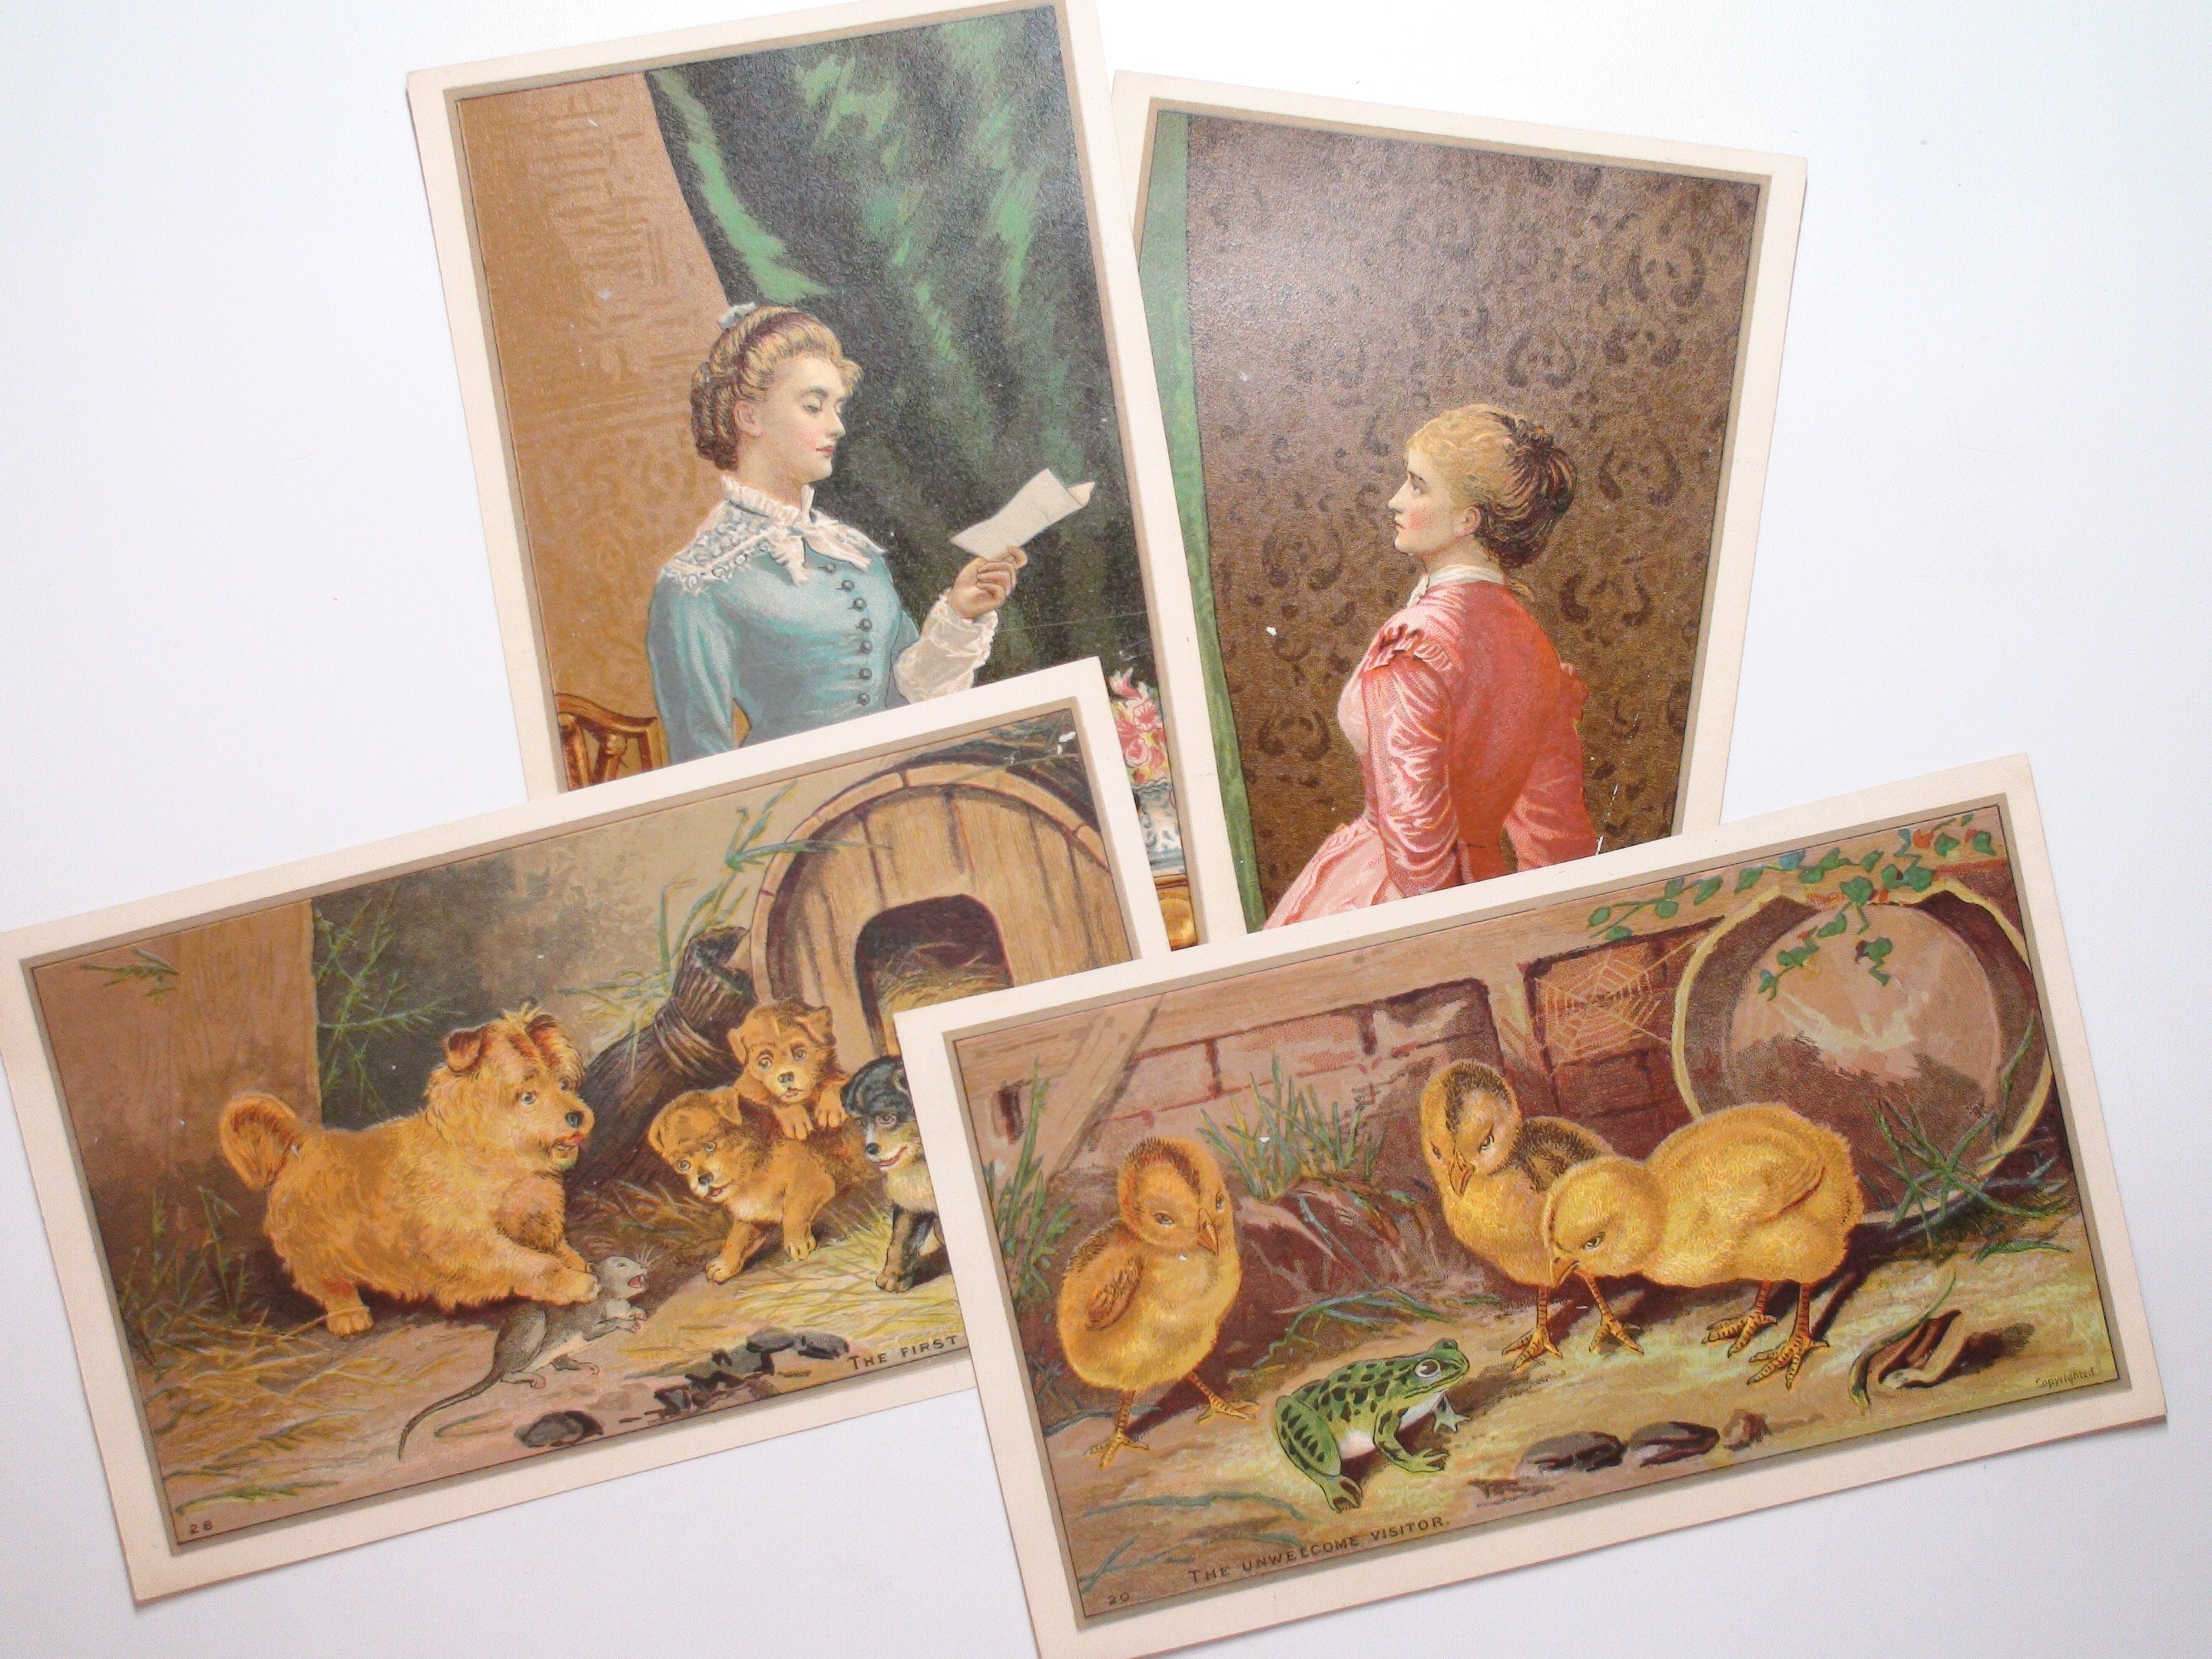 Lot of 6 Original Victorian Postcards, In Excellent Condition